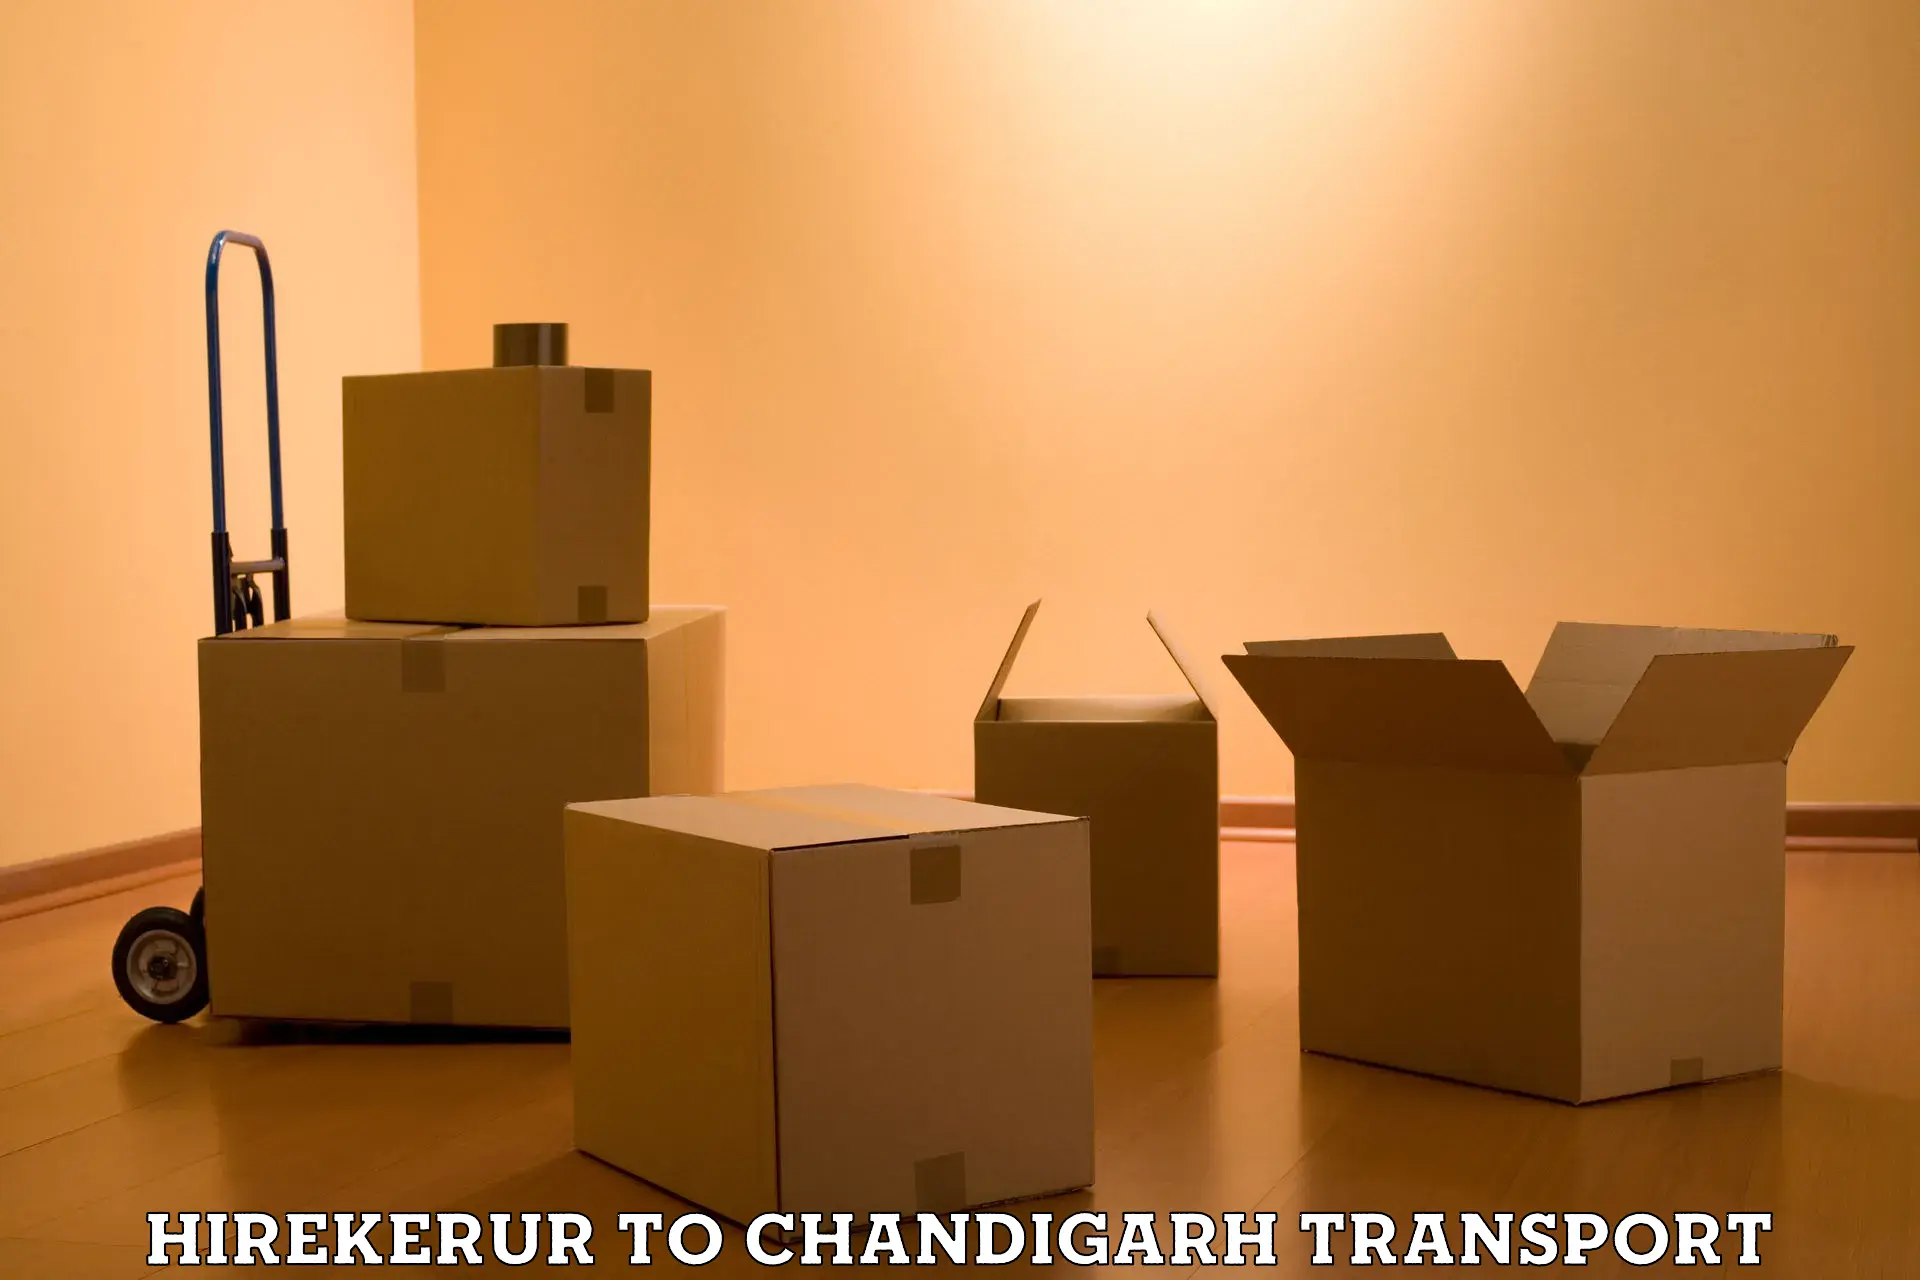 Commercial transport service Hirekerur to Chandigarh